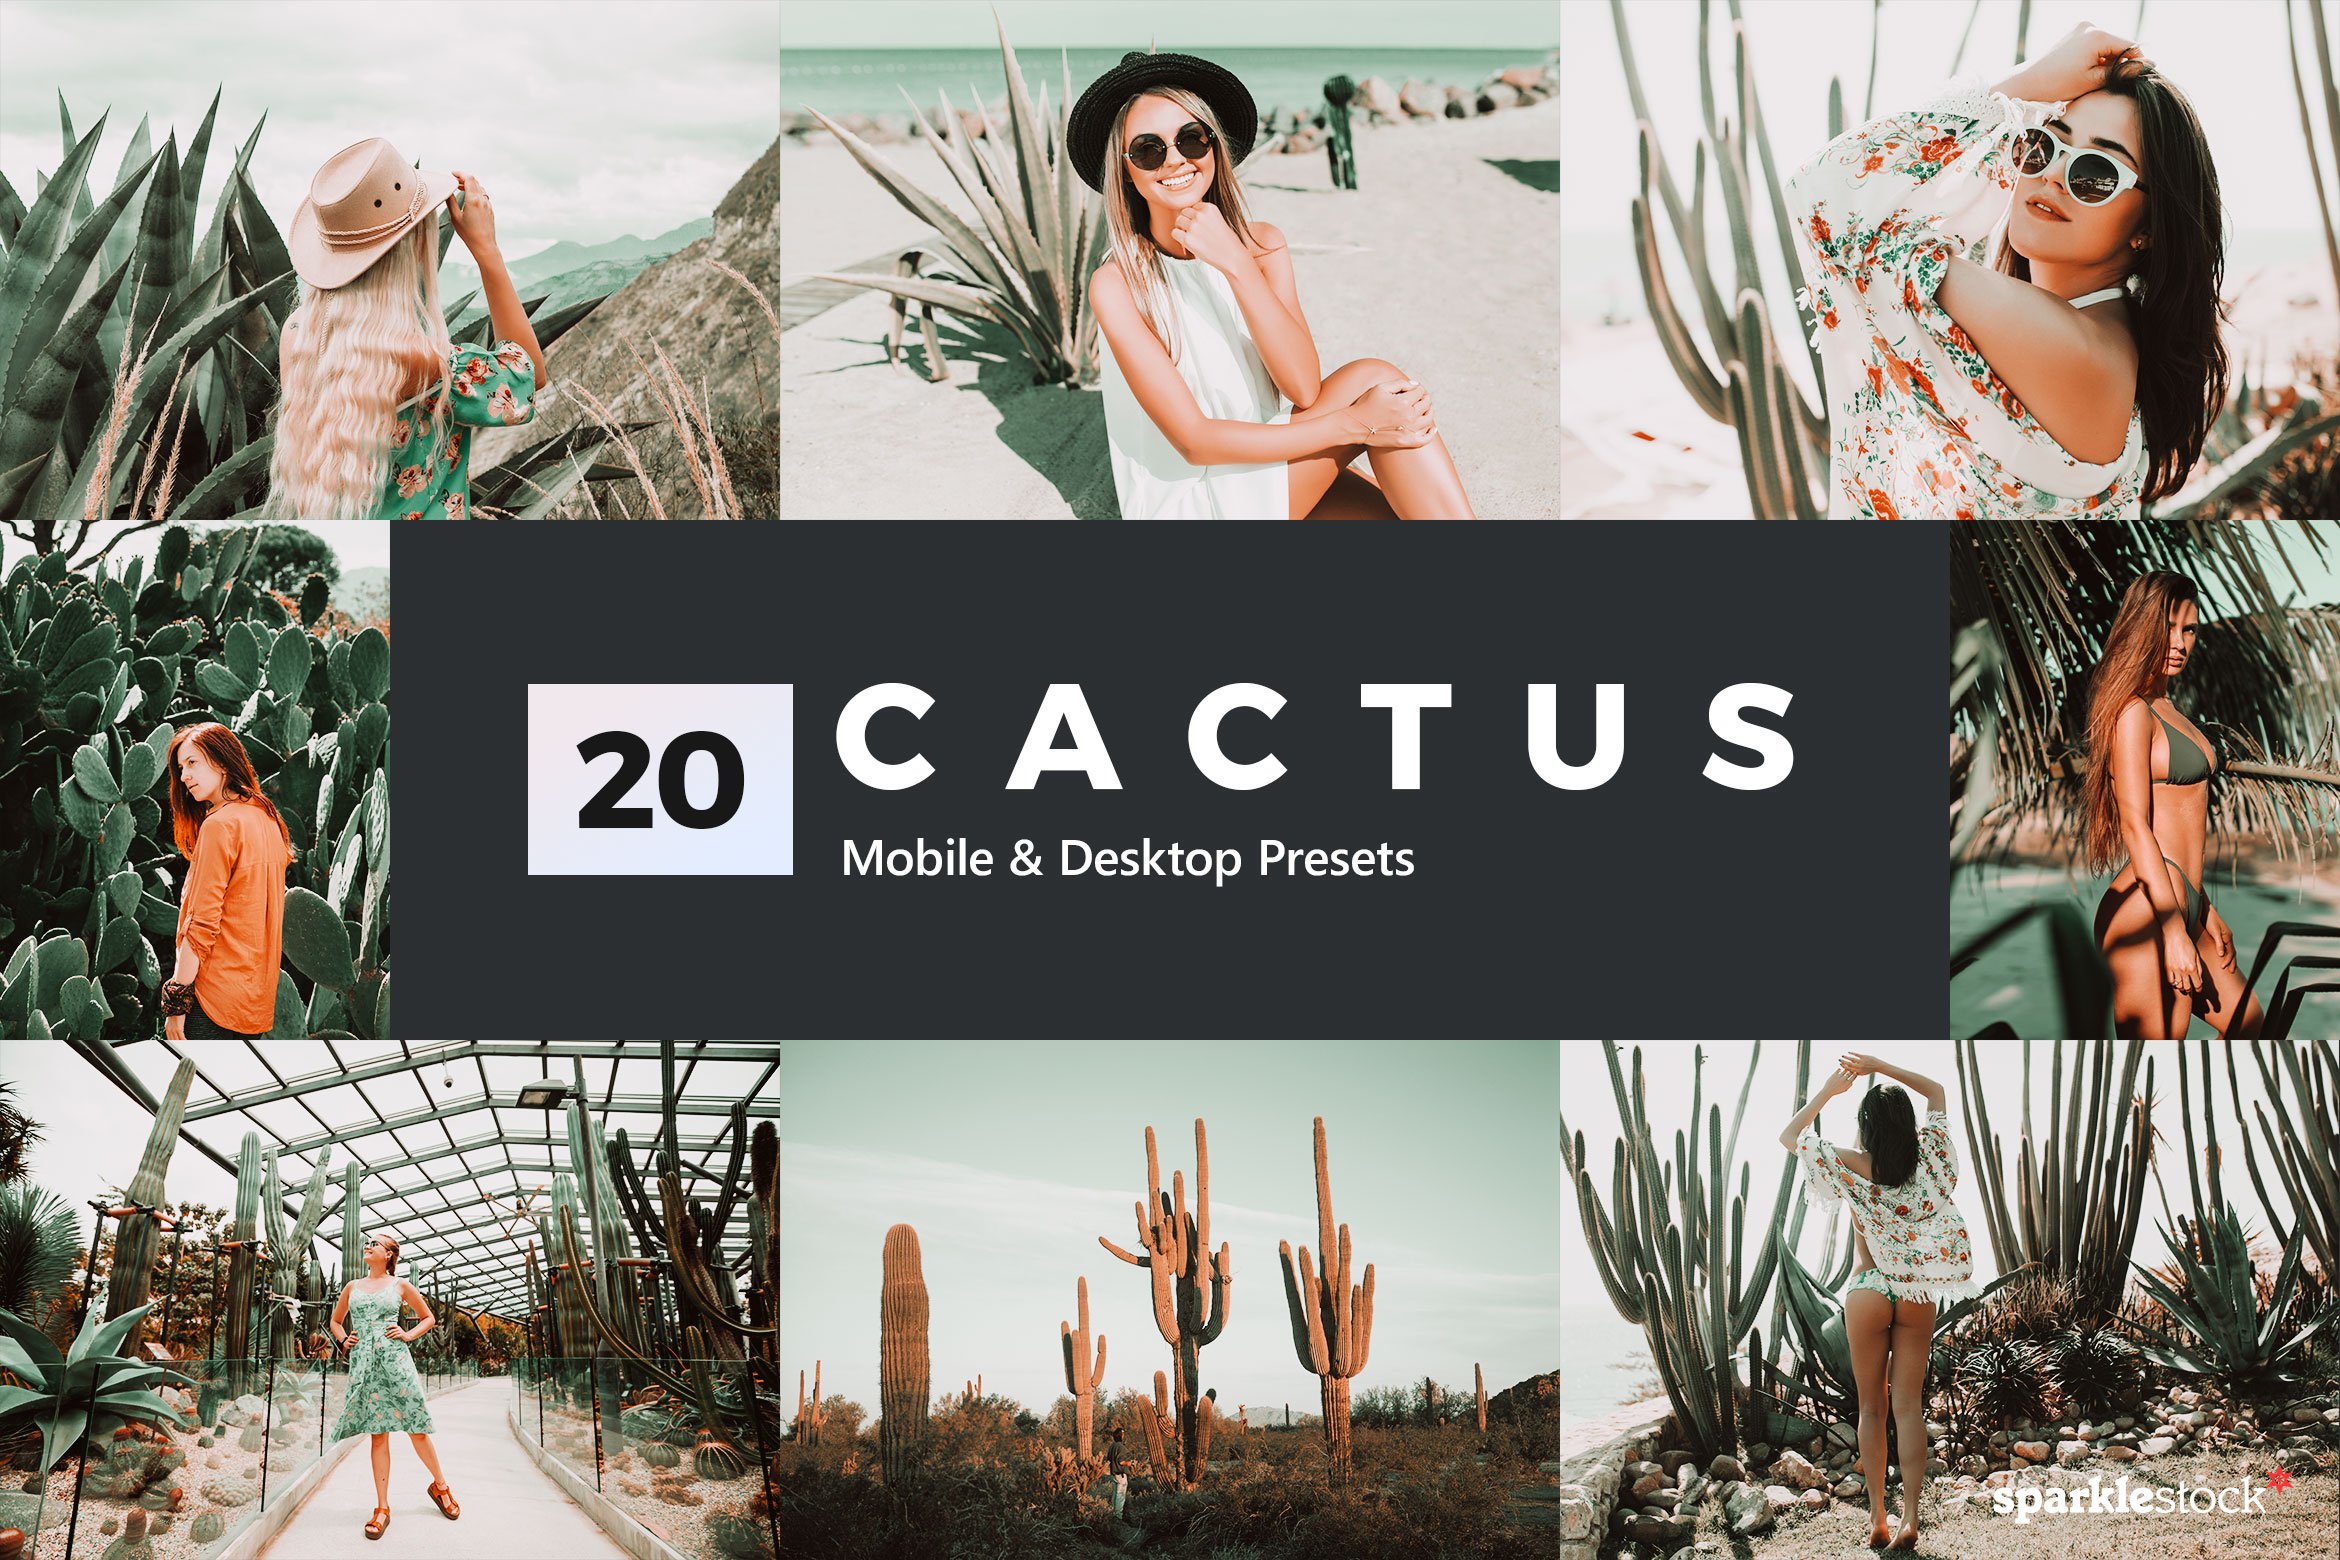 20 Cactus Lightroom Presets and LUTscover image.